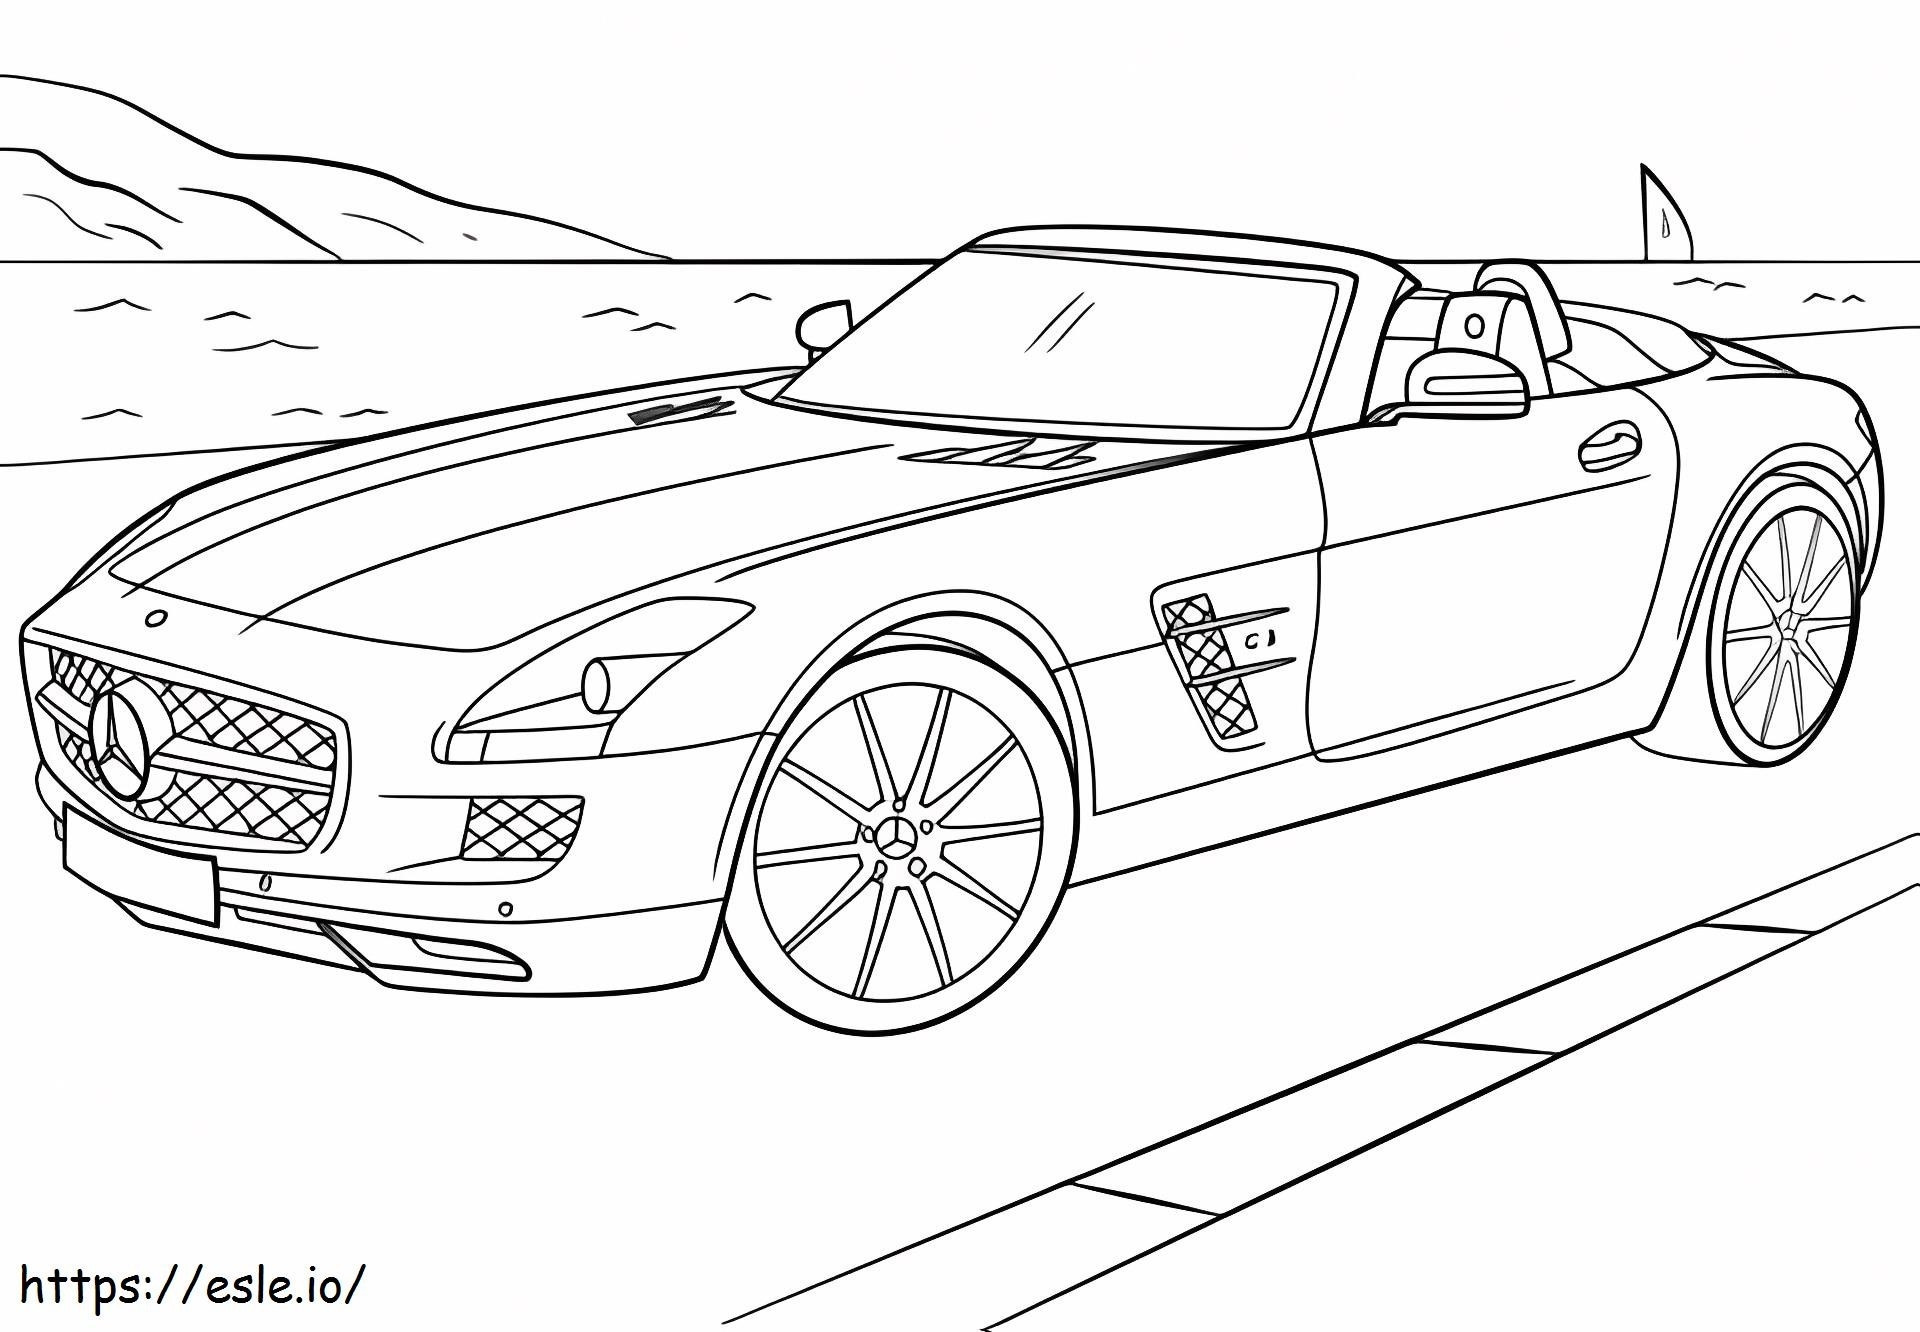 1527154450 Mercedes Benz Sls Amg Gt coloring page